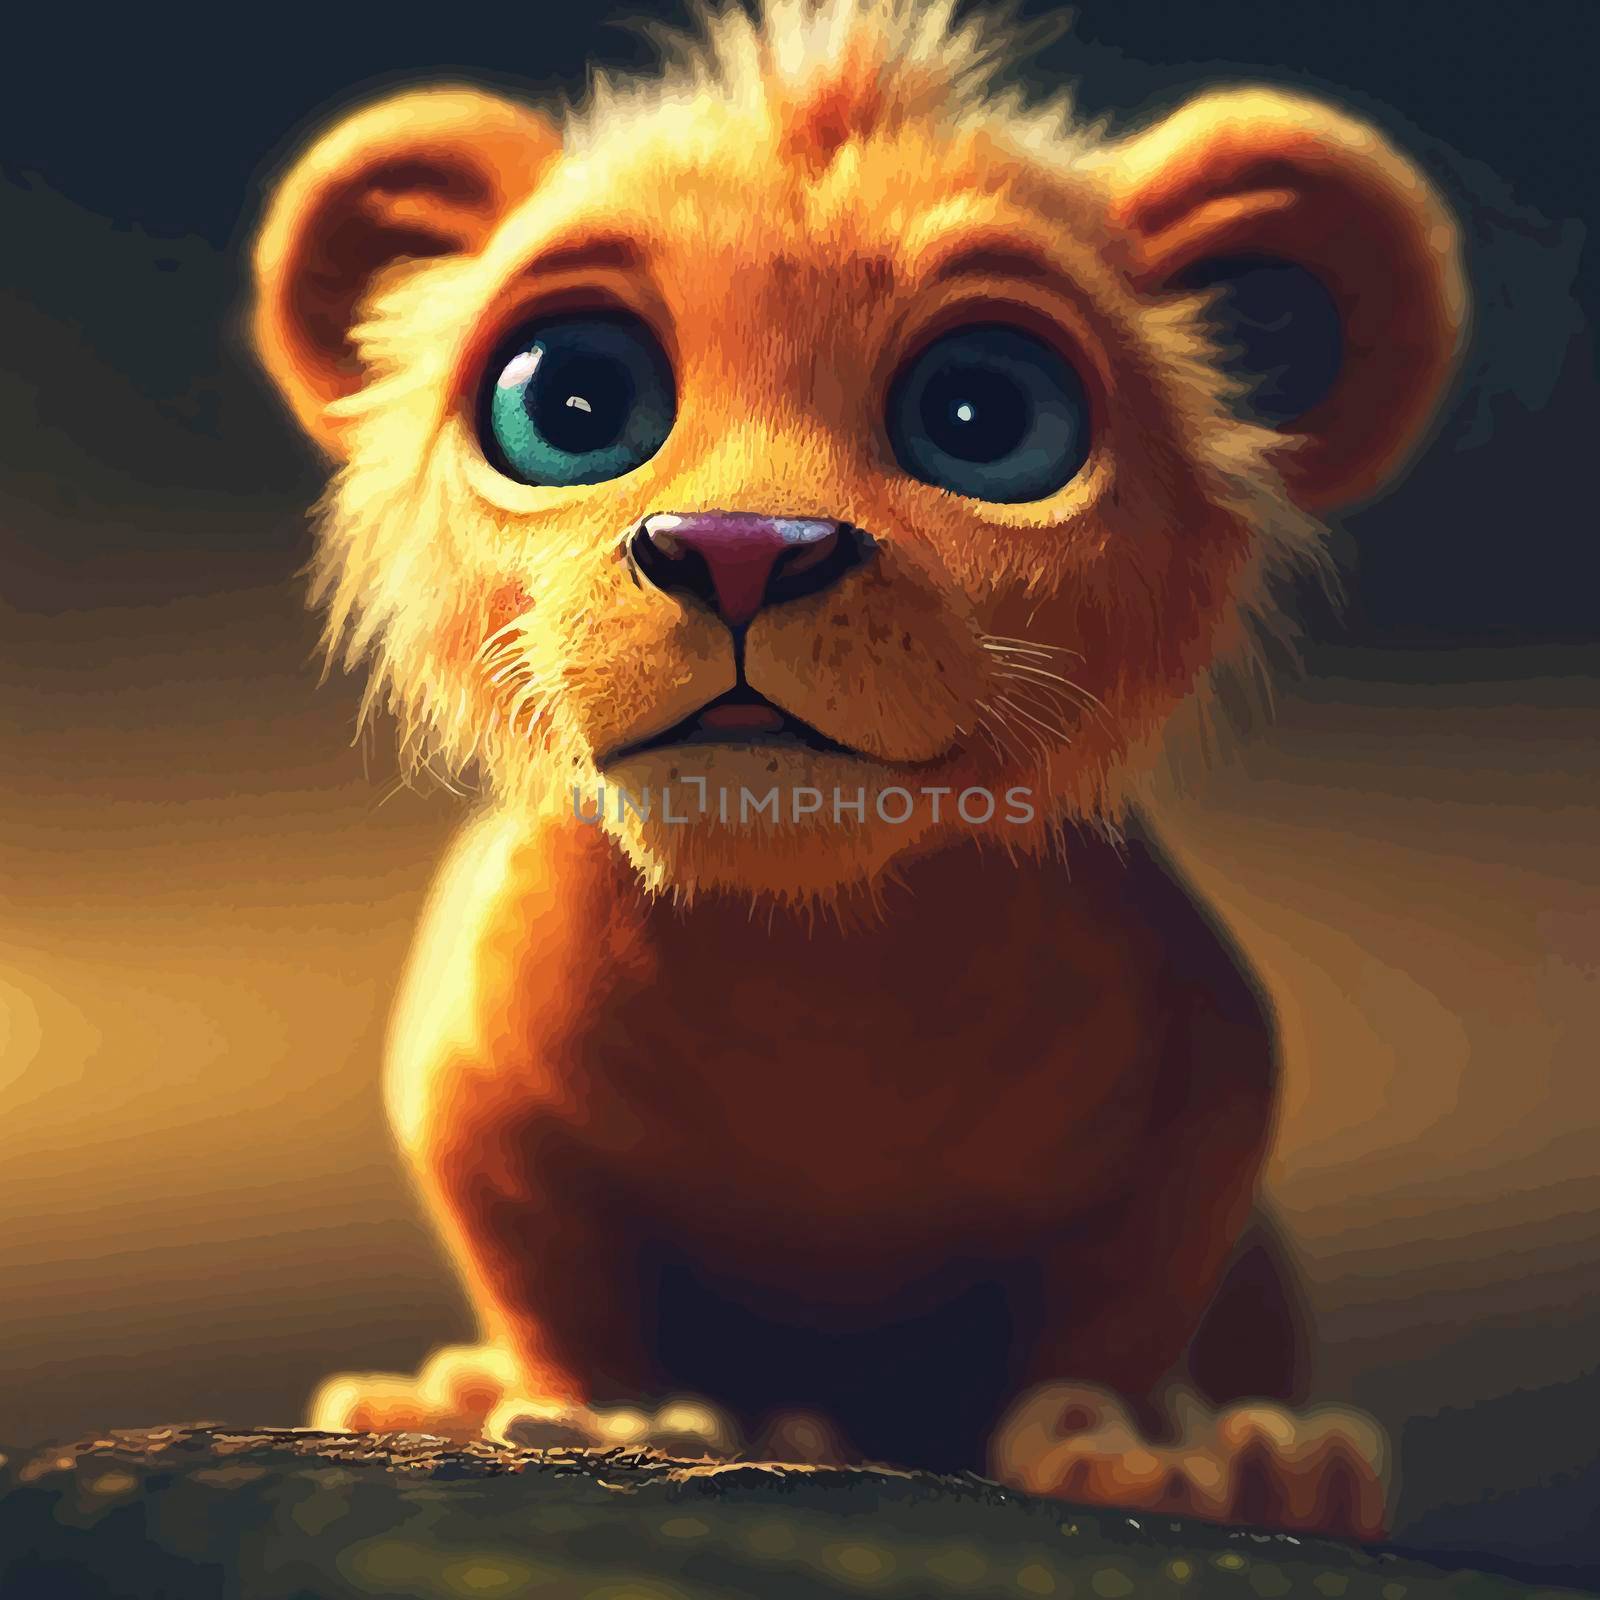 animated illustration of a cute lion, animated baby lion portrait by JpRamos